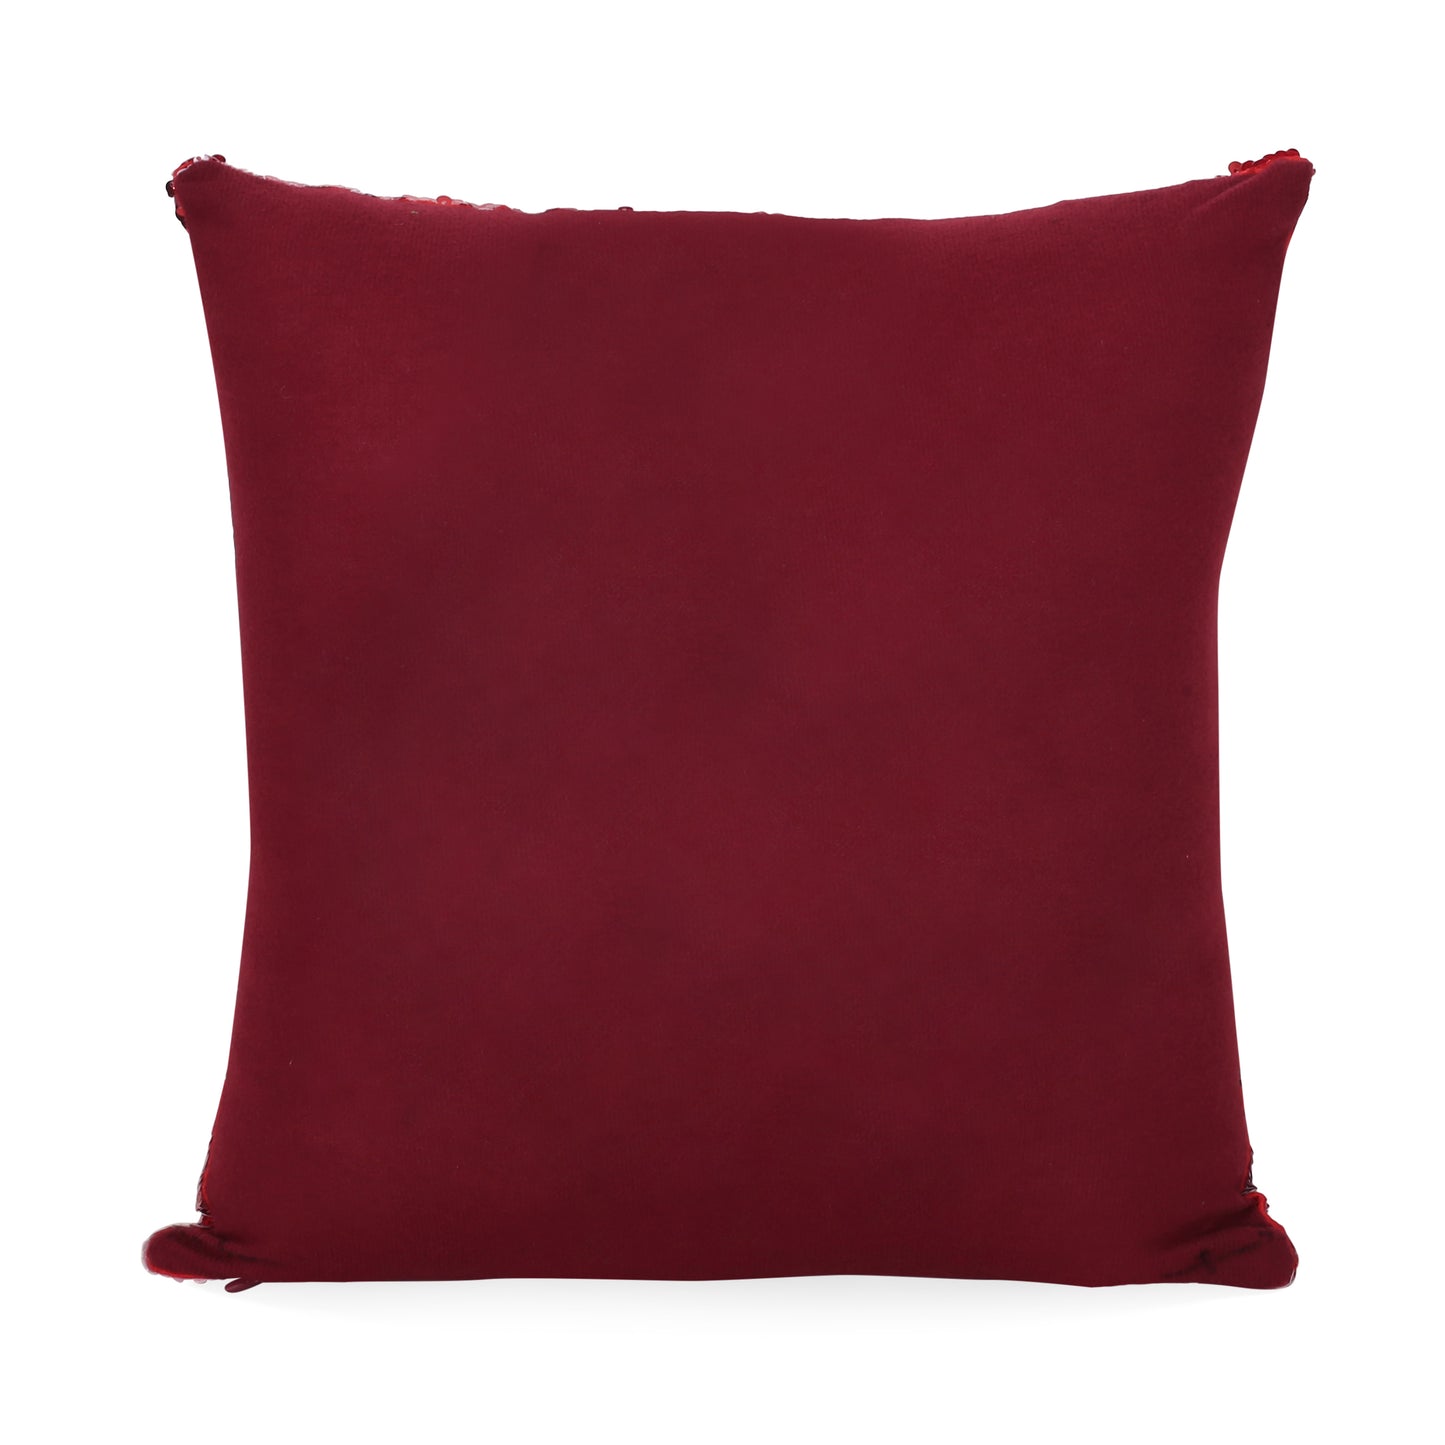 Romious Glam Sequin Christmas Throw Pillow Cover